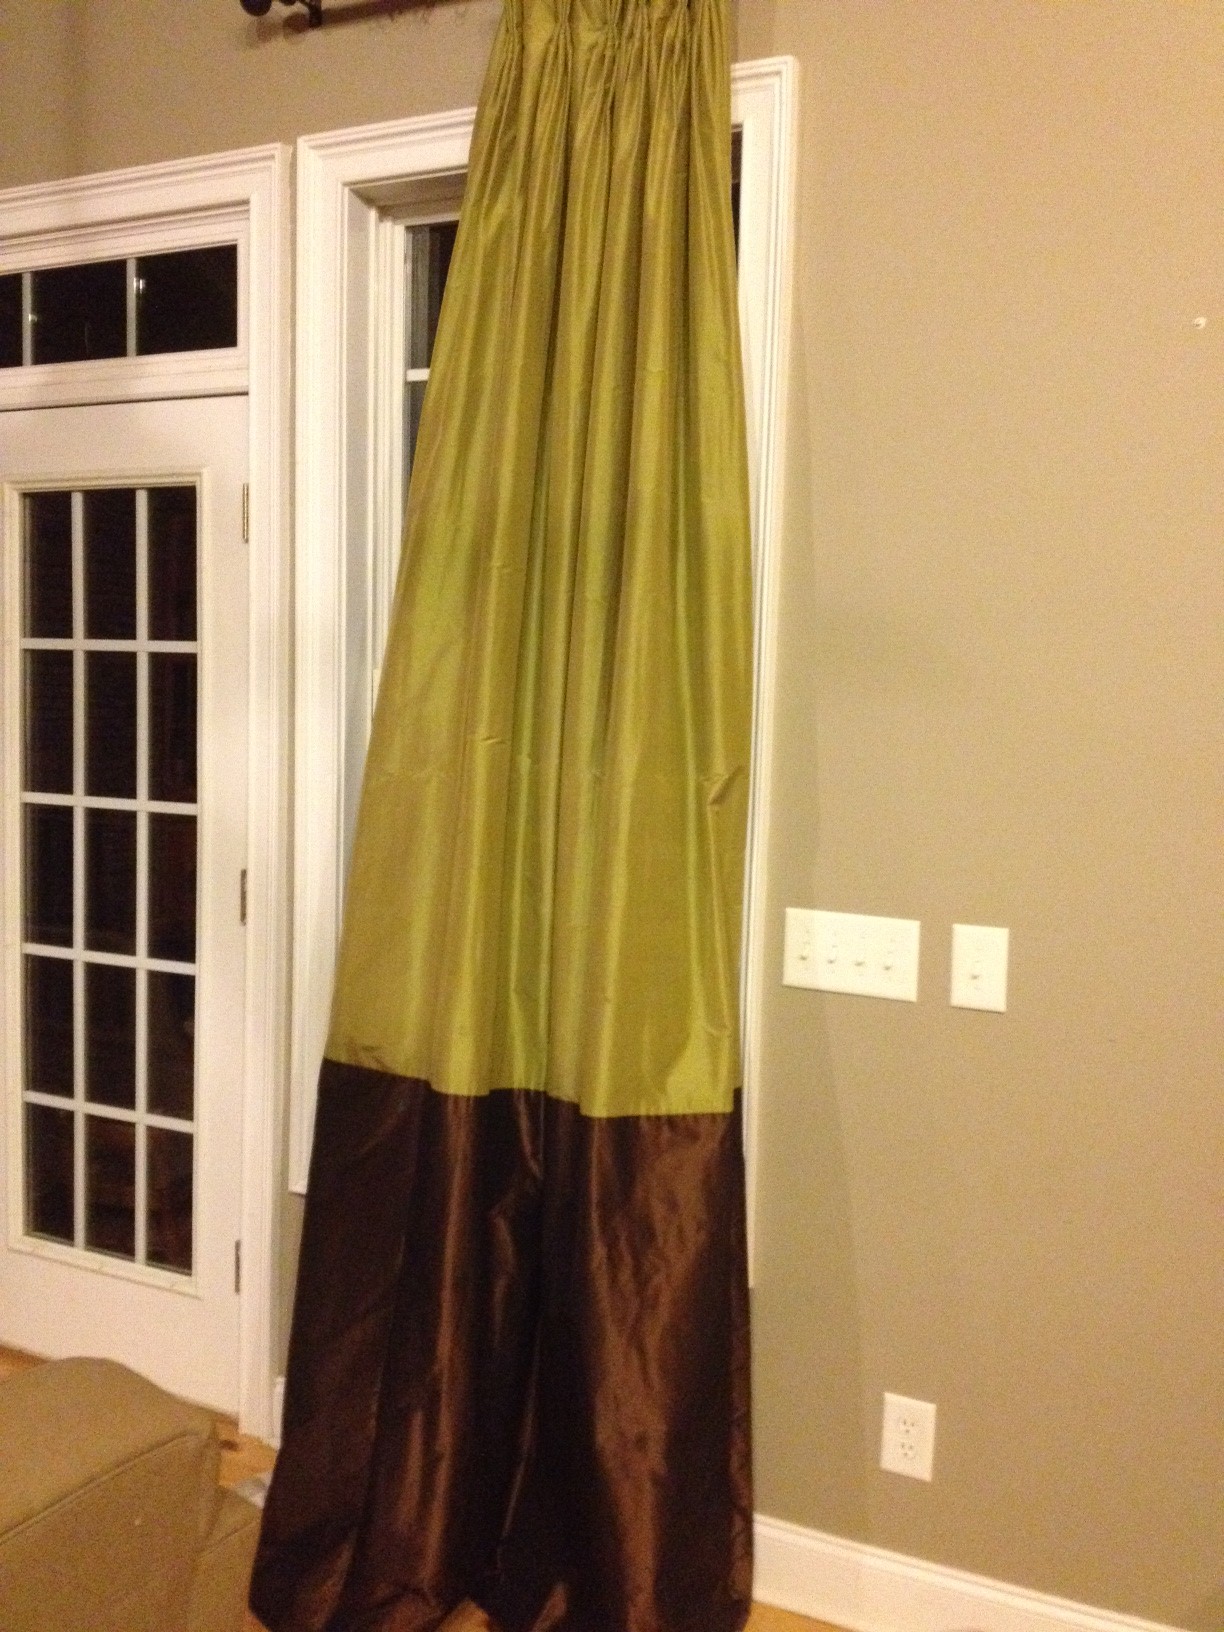 Olive & Chocolate Brown silk drapes